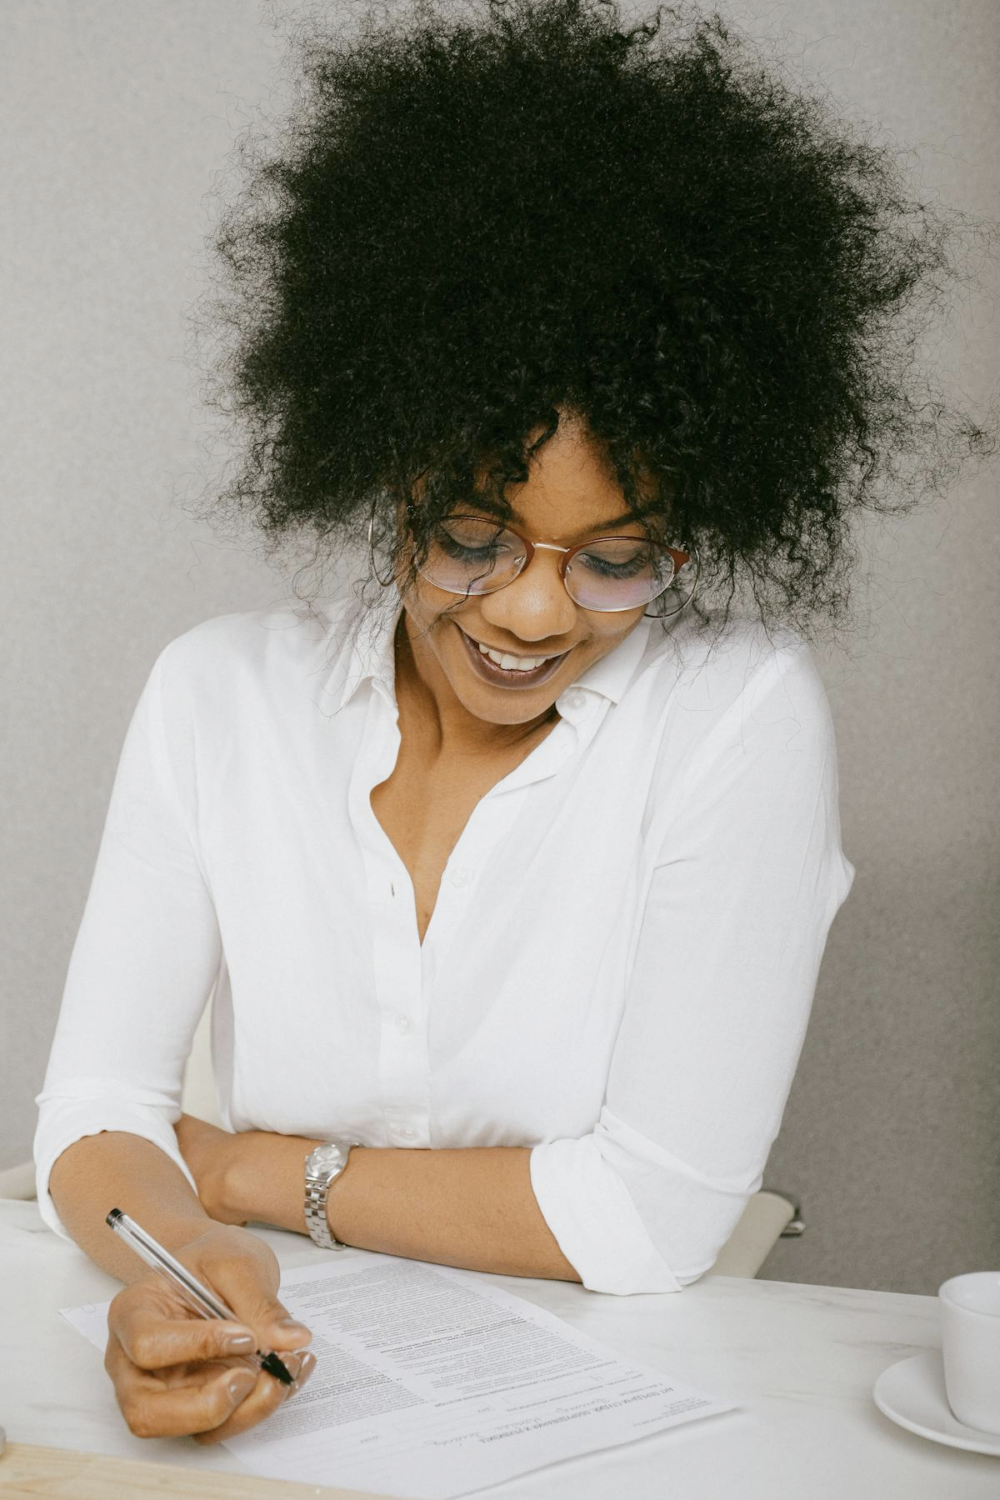 a smiling woman with curly frizzy hair smiling and writing something